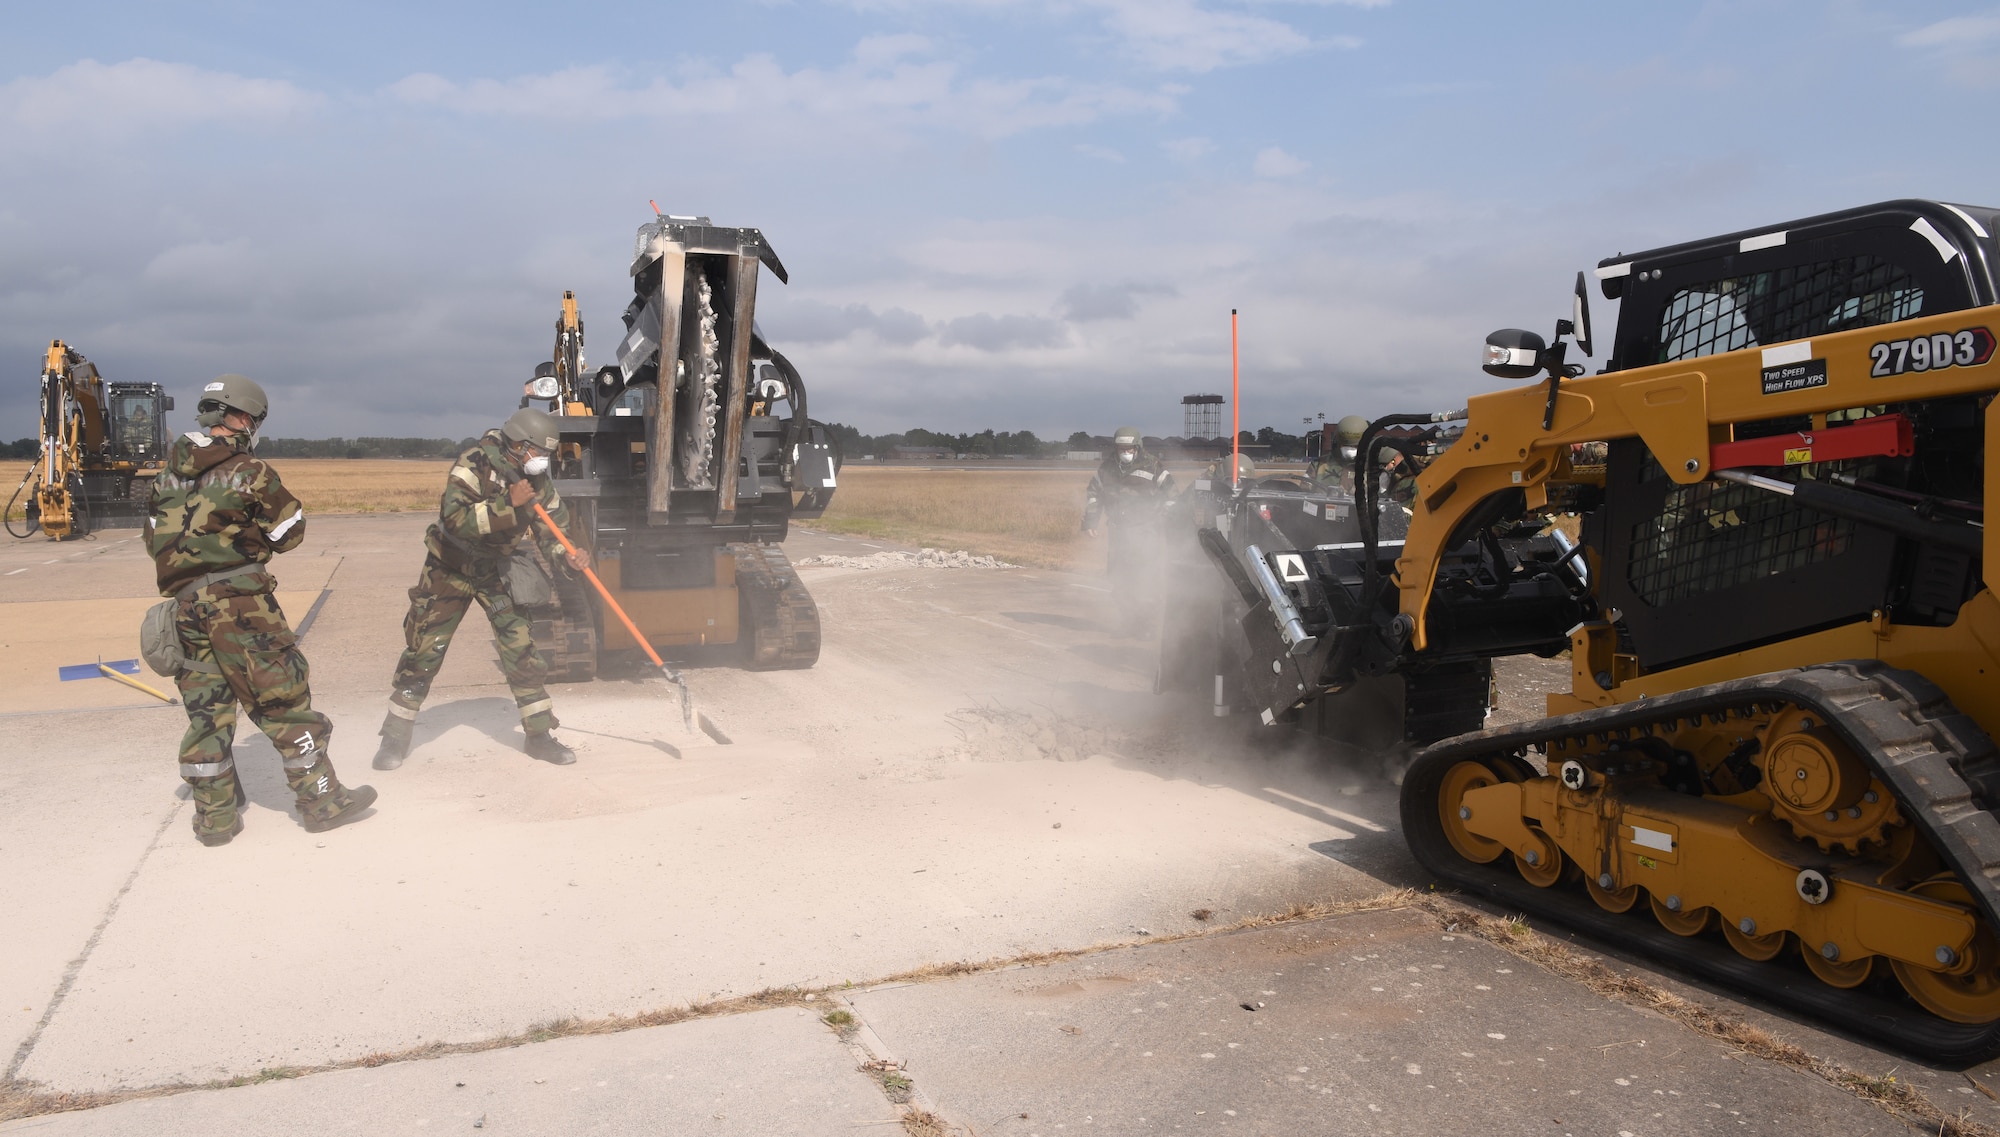 U.S. Air Force Airmen from the 100th Civil Engineer Squadron help clear broken concrete during a simulated runway repair as part of a a chemical, biological, radiological, nuclear and explosives exercise at Royal Air Force Mildenhall, England, Aug. 17, 2022. The Airmen used a variety of equipment including excavators and loaders to practice removing damaged concrete and base course on a simulated runway. They practiced repair, break up and removal of concrete, before mixing and pouring new, quick-drying concrete and levelling it, all while wearing mission-oriented protective postures gear. (U.S. Air Force photo by Karen Abeyasekere)